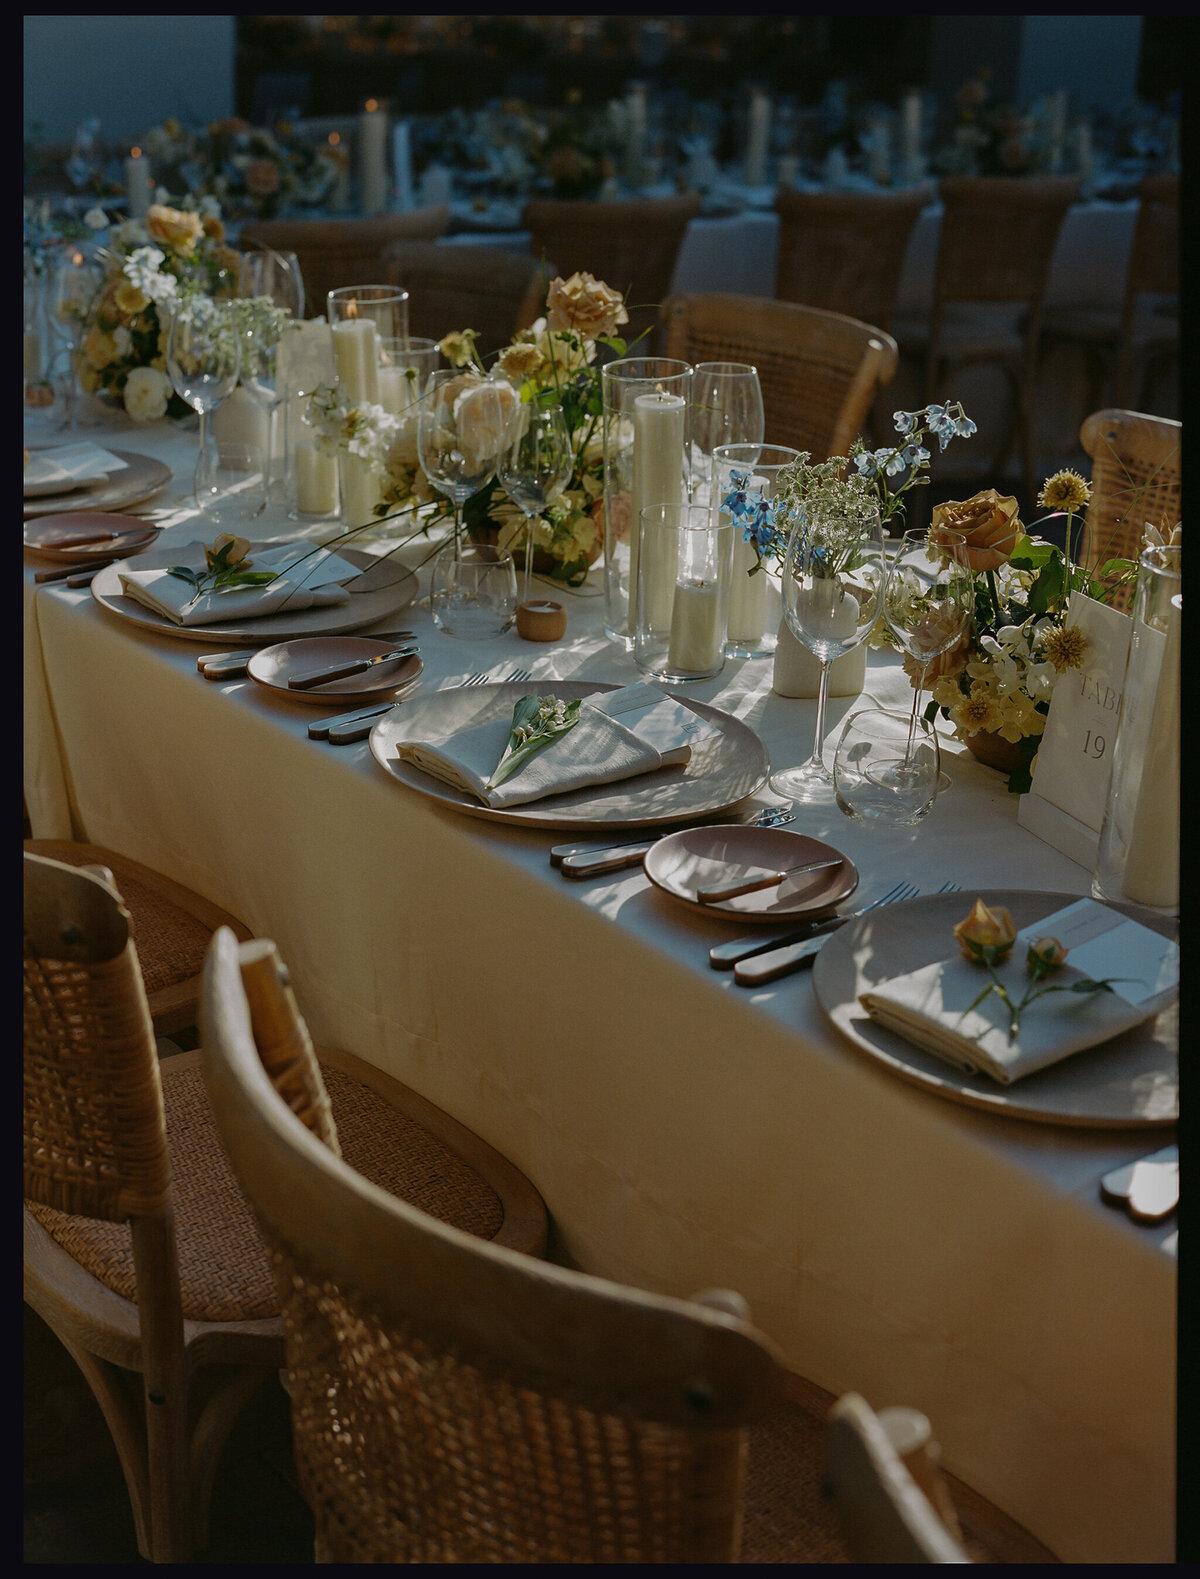 warm earthy tones are shown on this wedding dining table setup .  the design includes casa de perrin china, glassware, and flatware. Theoni dining chairs and linens are also used.